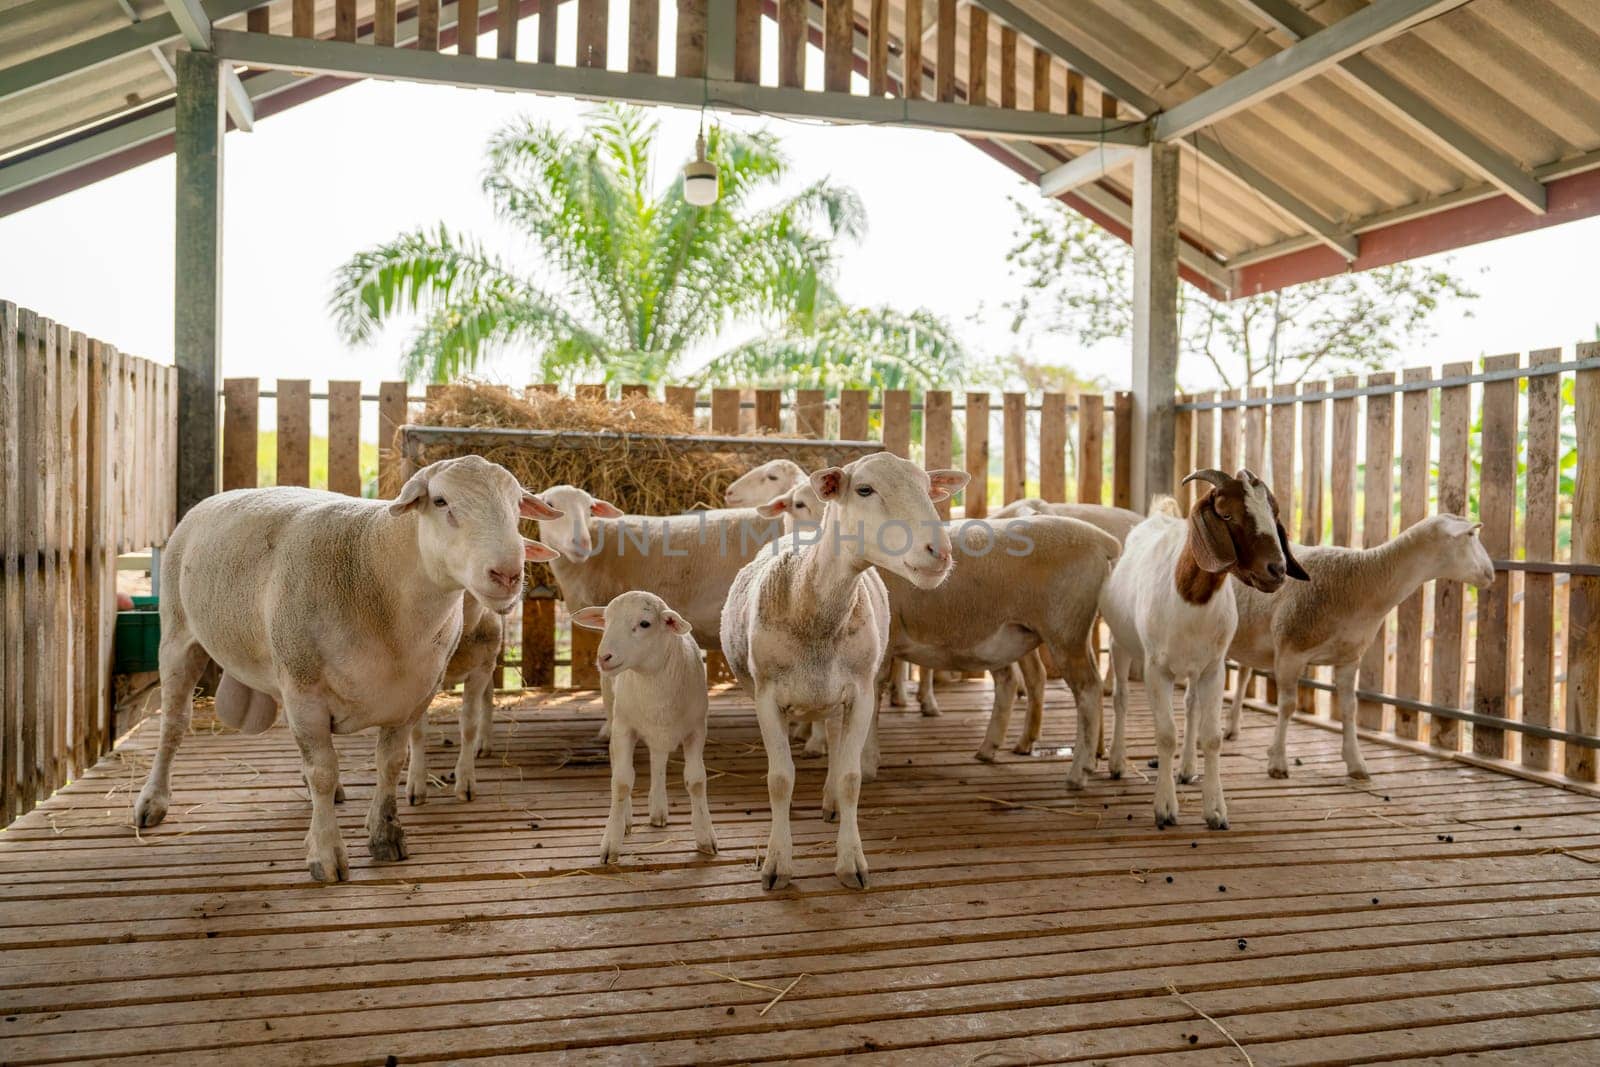 Group of sheep stay calm together in stable and some of them look at camera with day light. by nrradmin